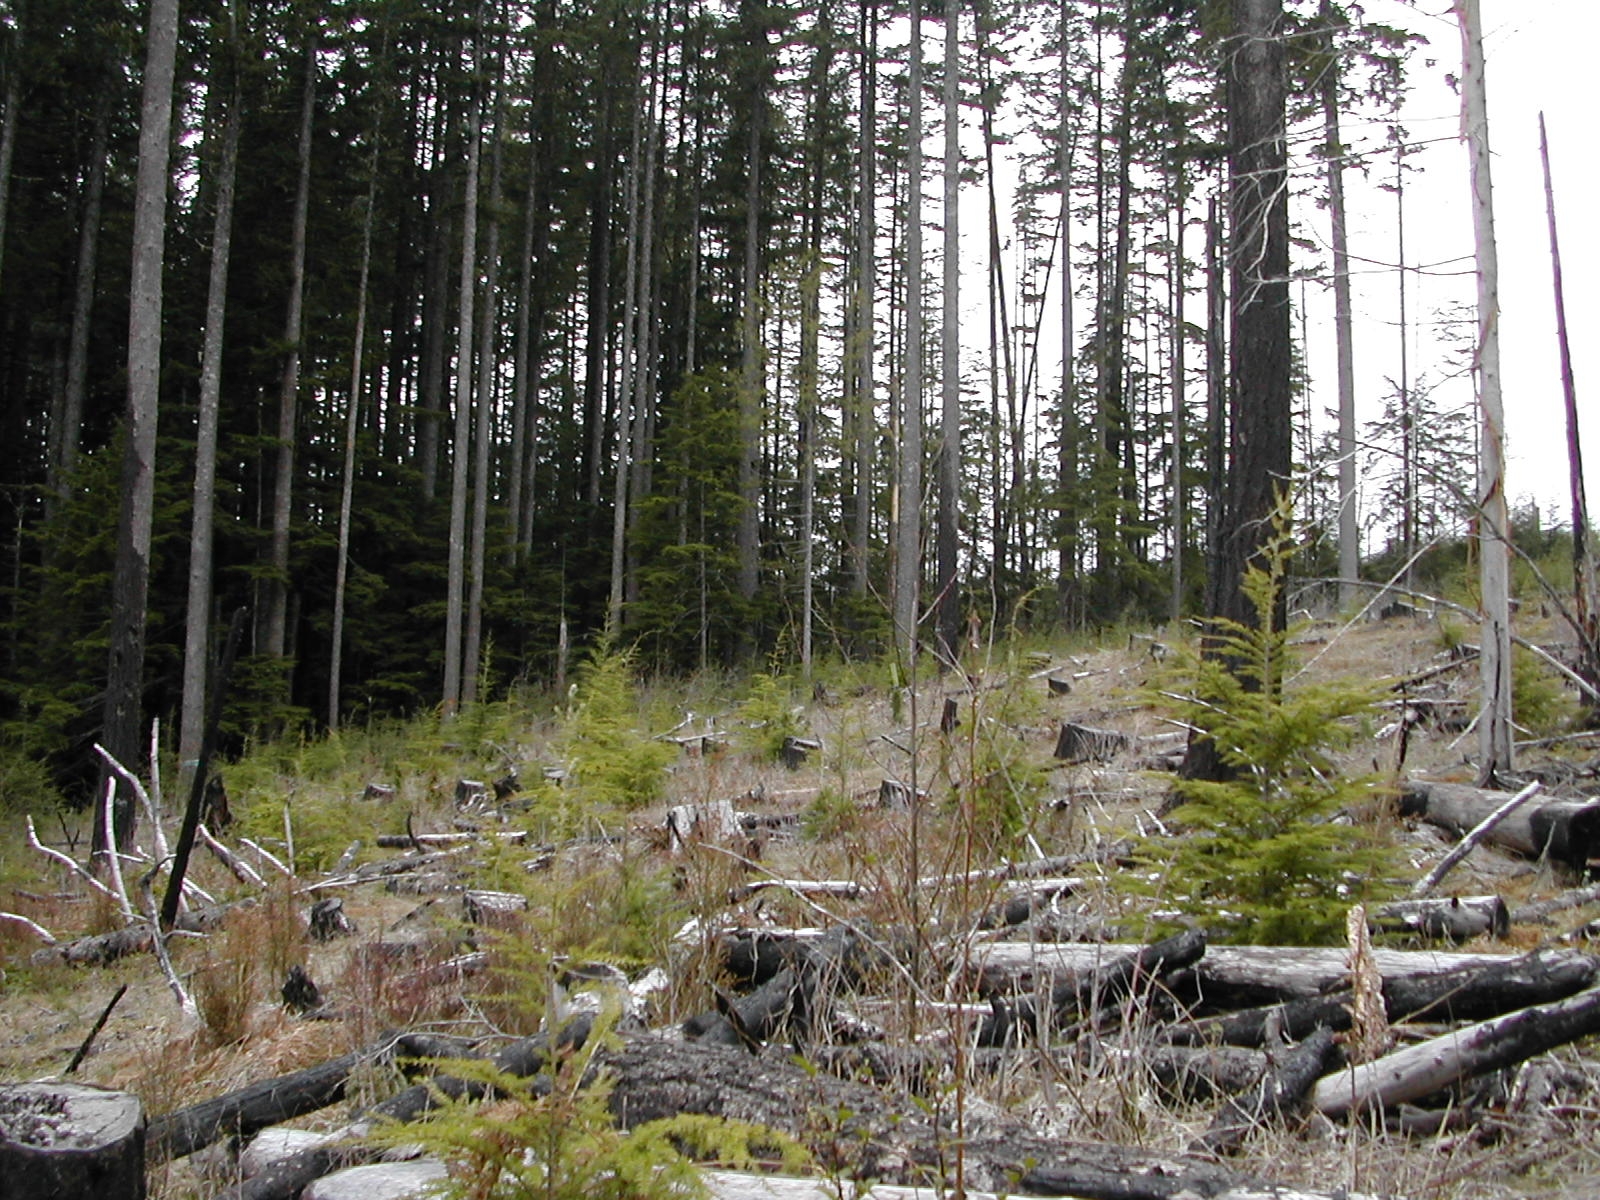 A clearcut on dry ground with some uniform tall forest in the background.